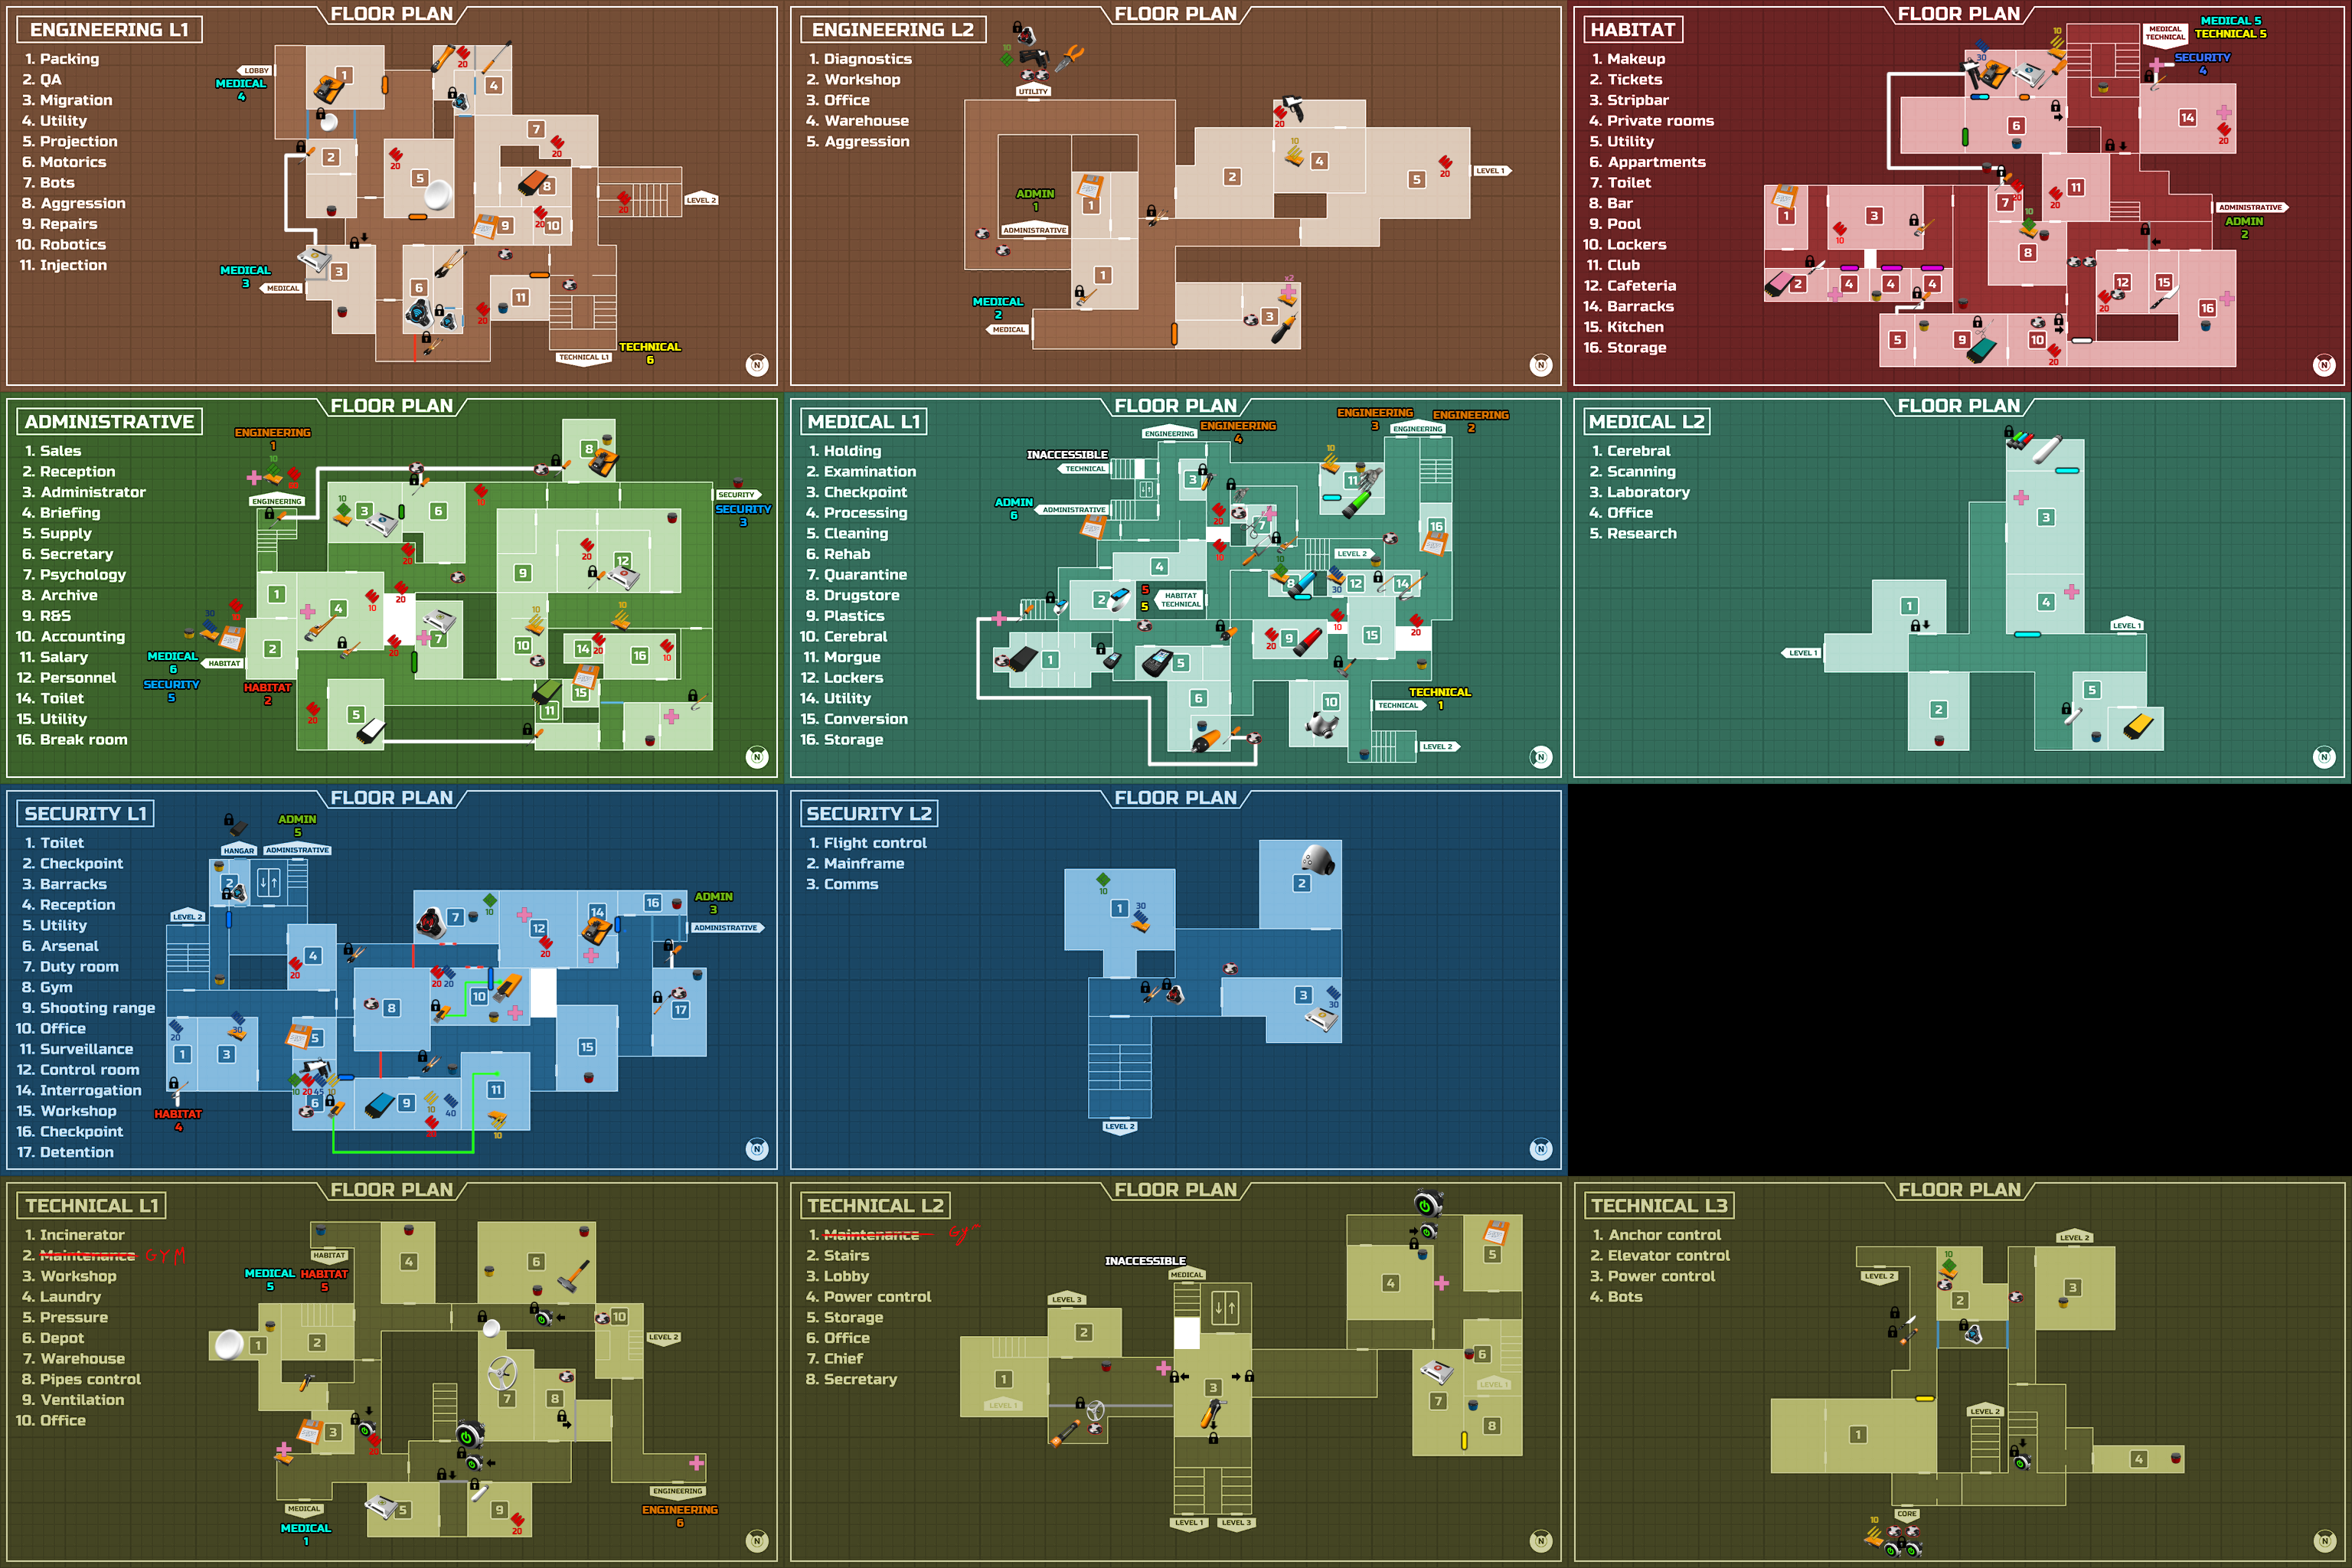 Steam Community :: Guide :: Weapon Evolution, Collection, and